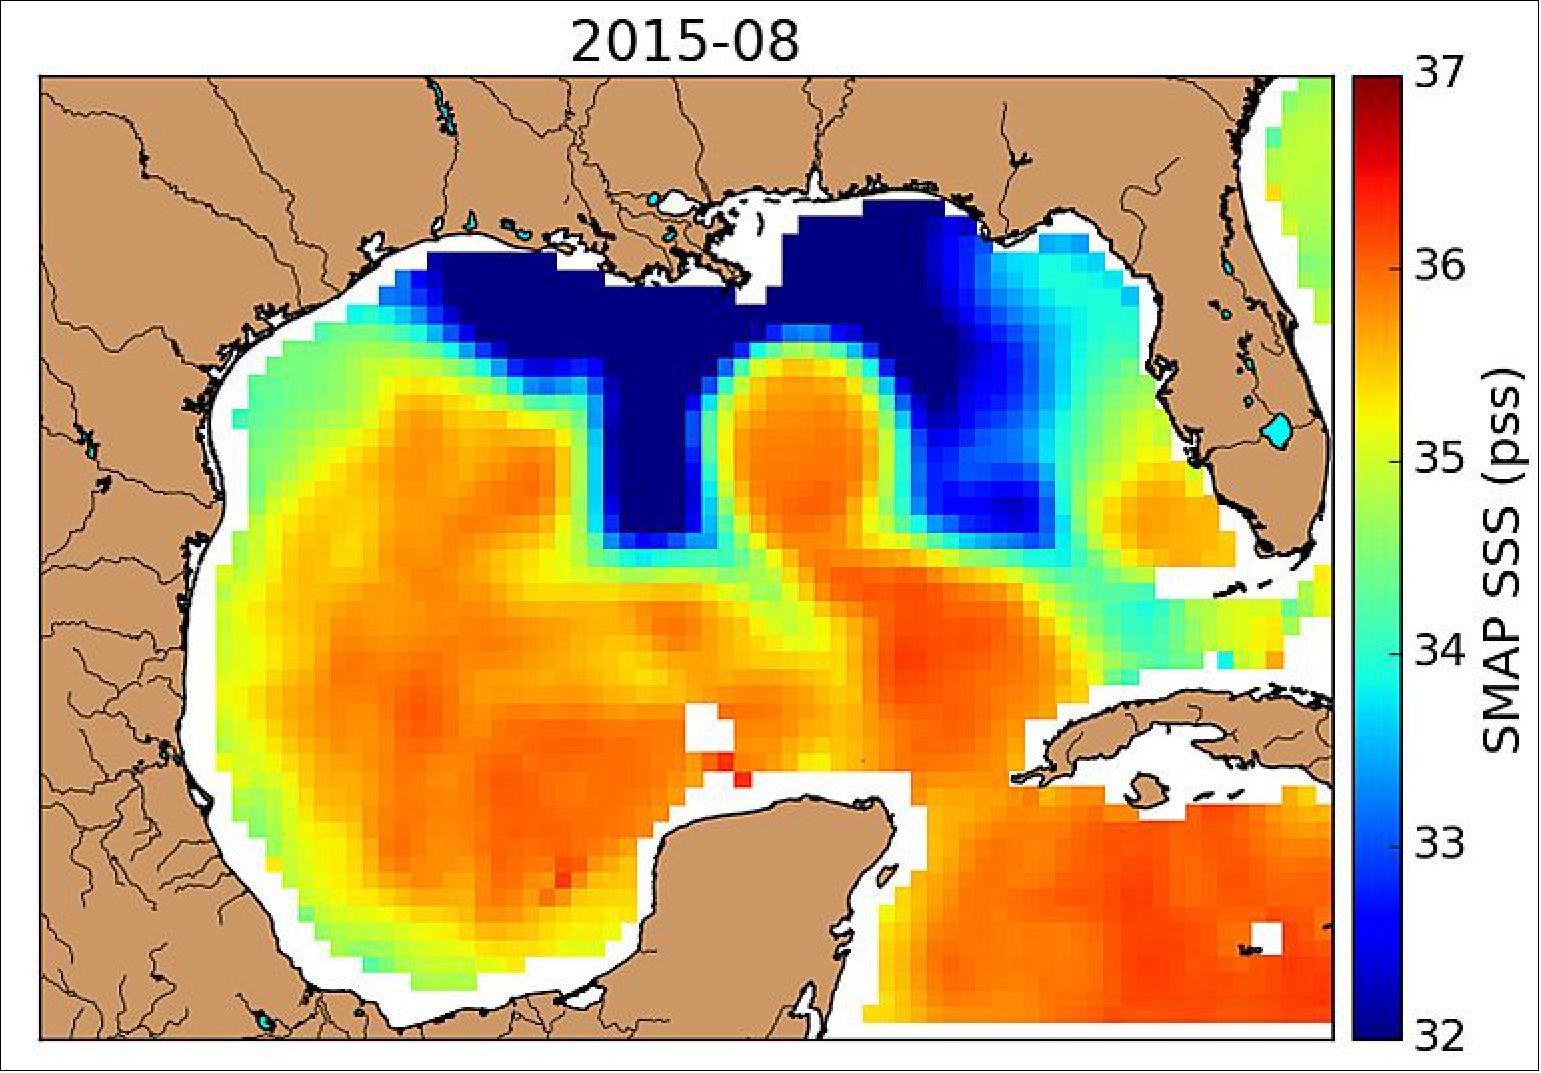 Figure 27: SMAP observed a horseshoe-shaped plume of freshwater (dark blue) in the Gulf of Mexico after Texas flooding in May 2015 (image creditt: NASA/JPL-Caltech)